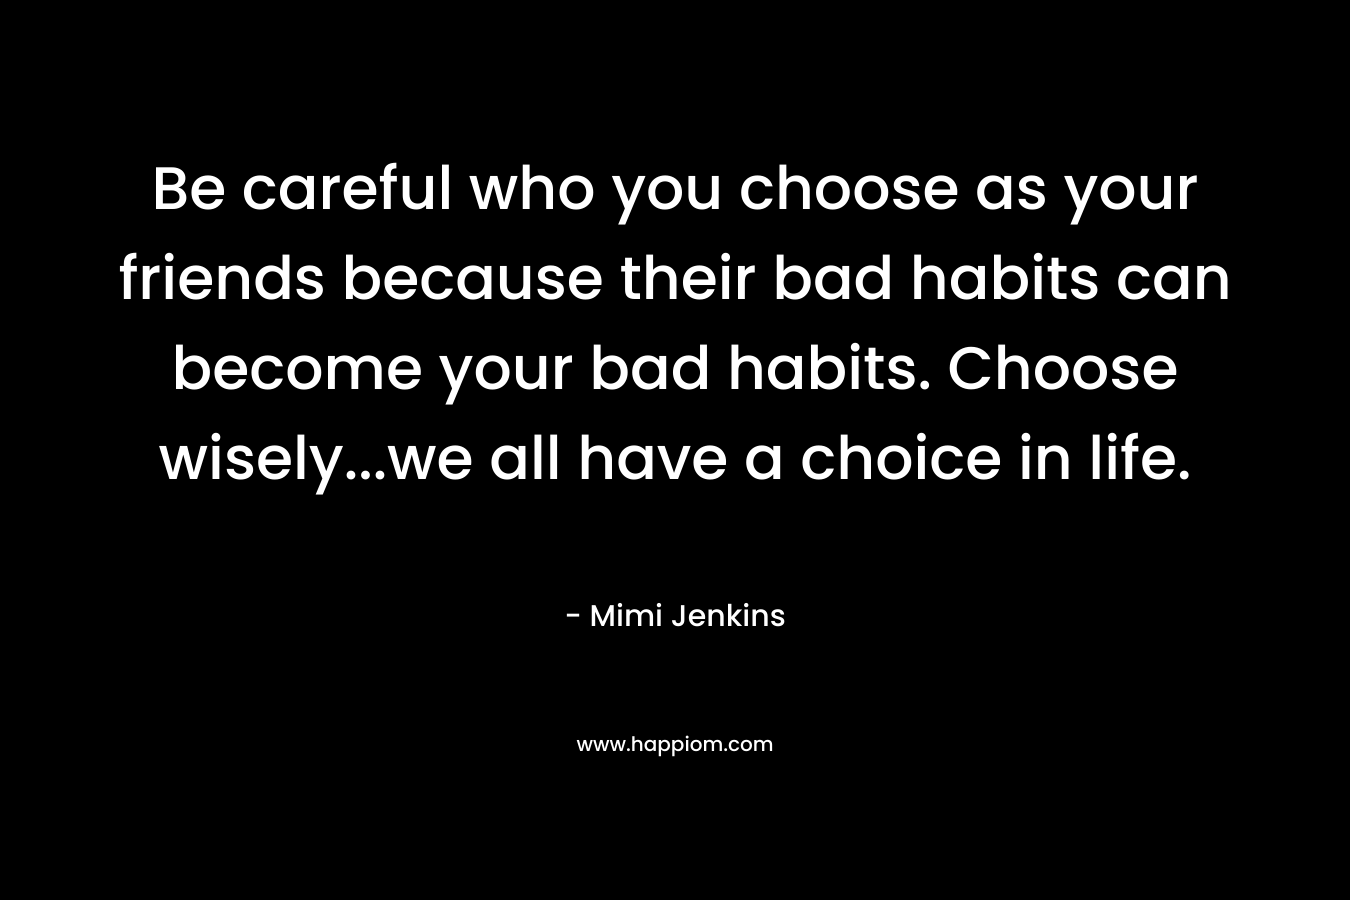 Be careful who you choose as your friends because their bad habits can become your bad habits. Choose wisely...we all have a choice in life.